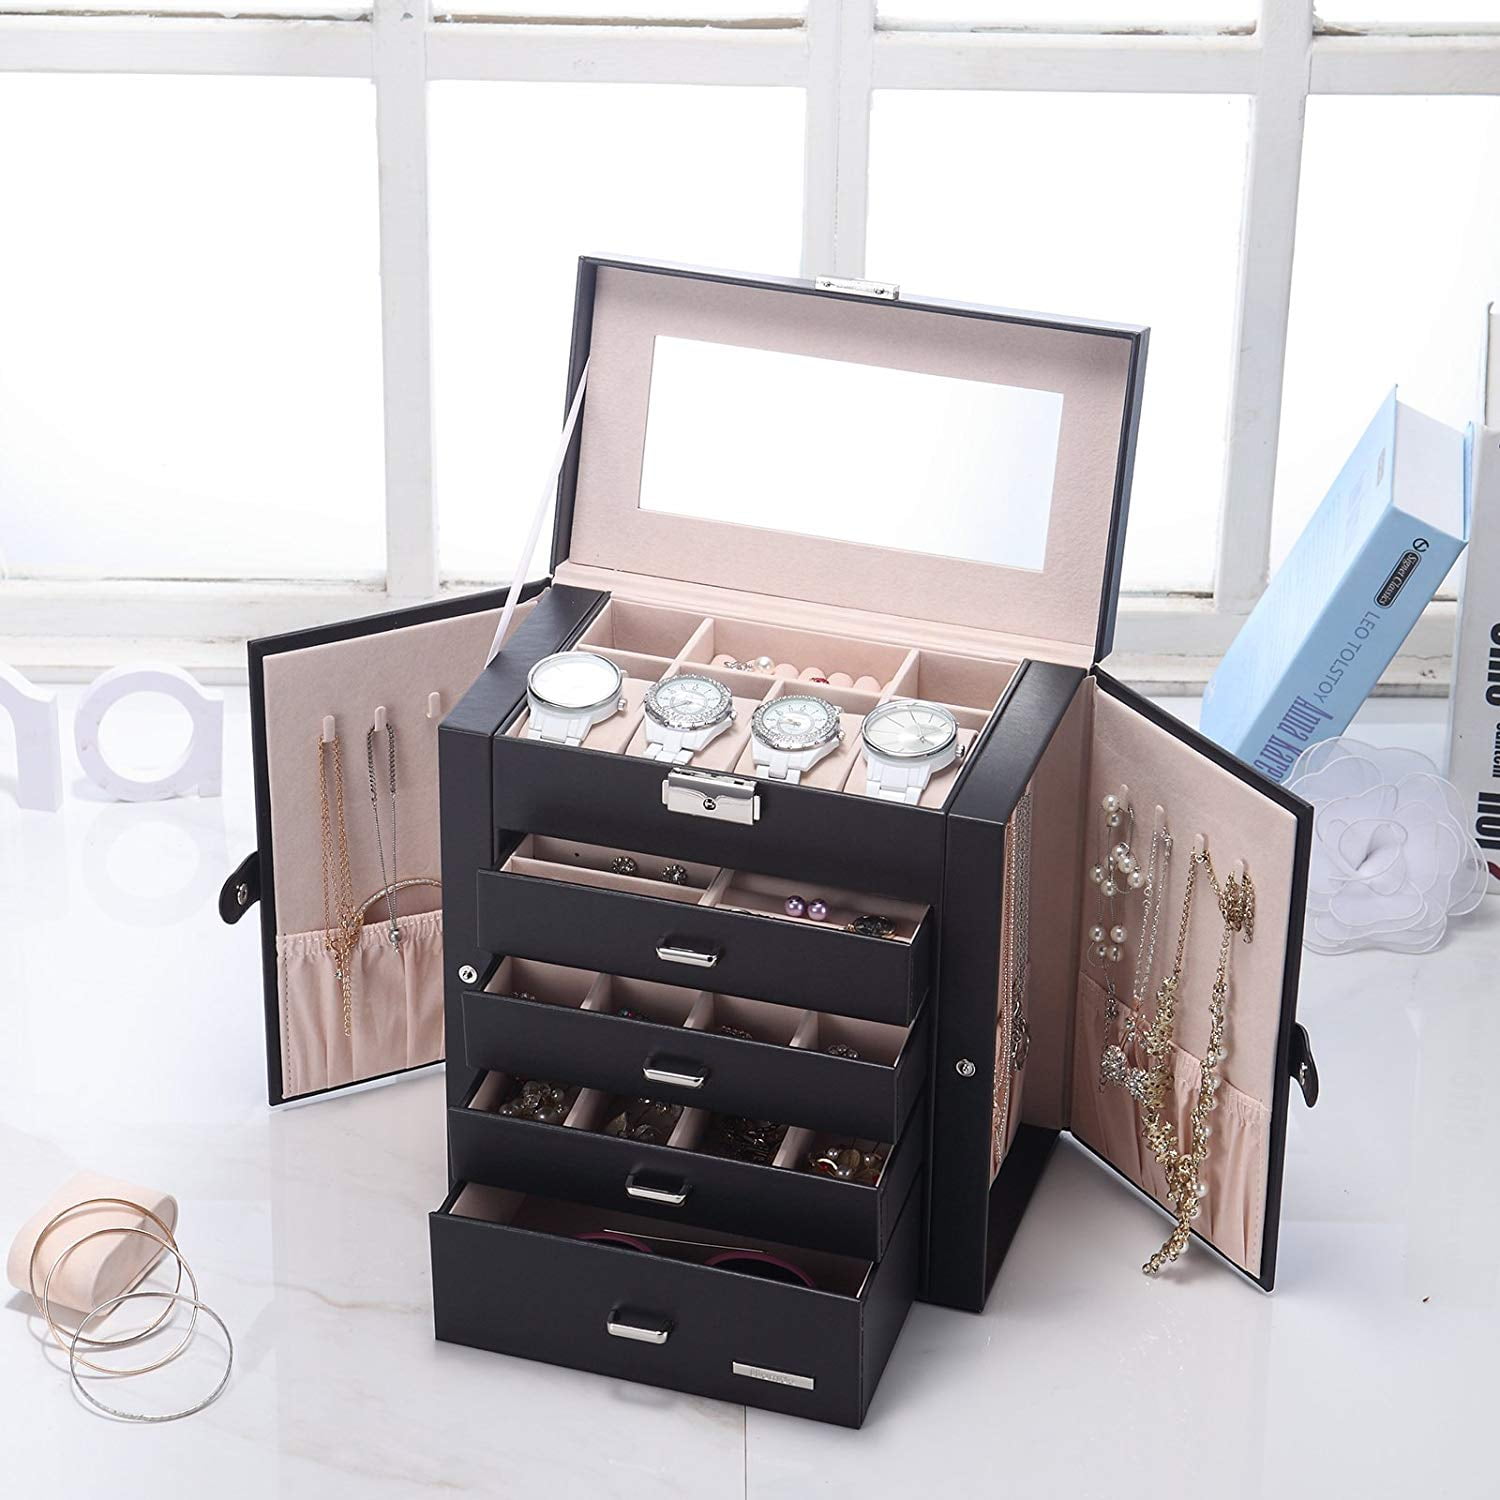 Details about   Earrings Jewelry Storage Box Case Necklace Ring Display Stand Holder Organizer 